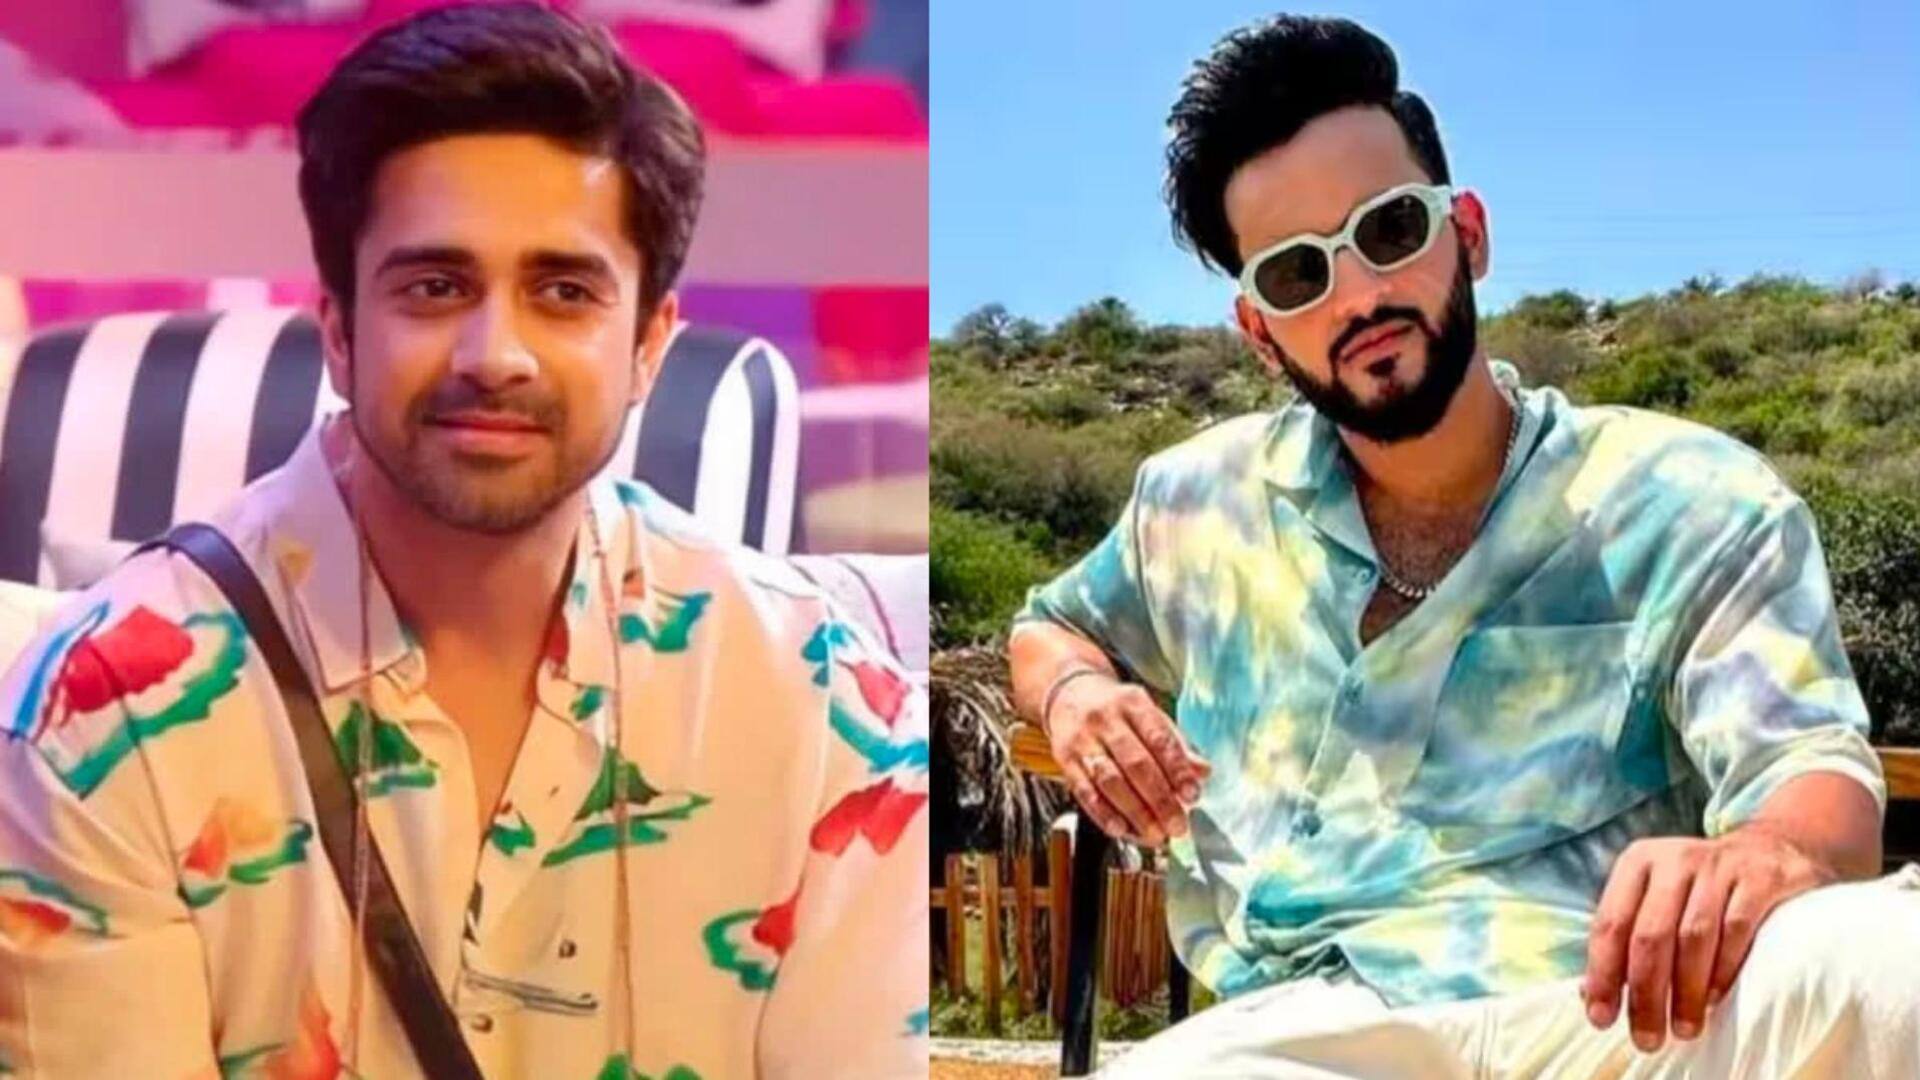 #BiggBossOTT2: How YouTubers are disrupting norms for TV actors